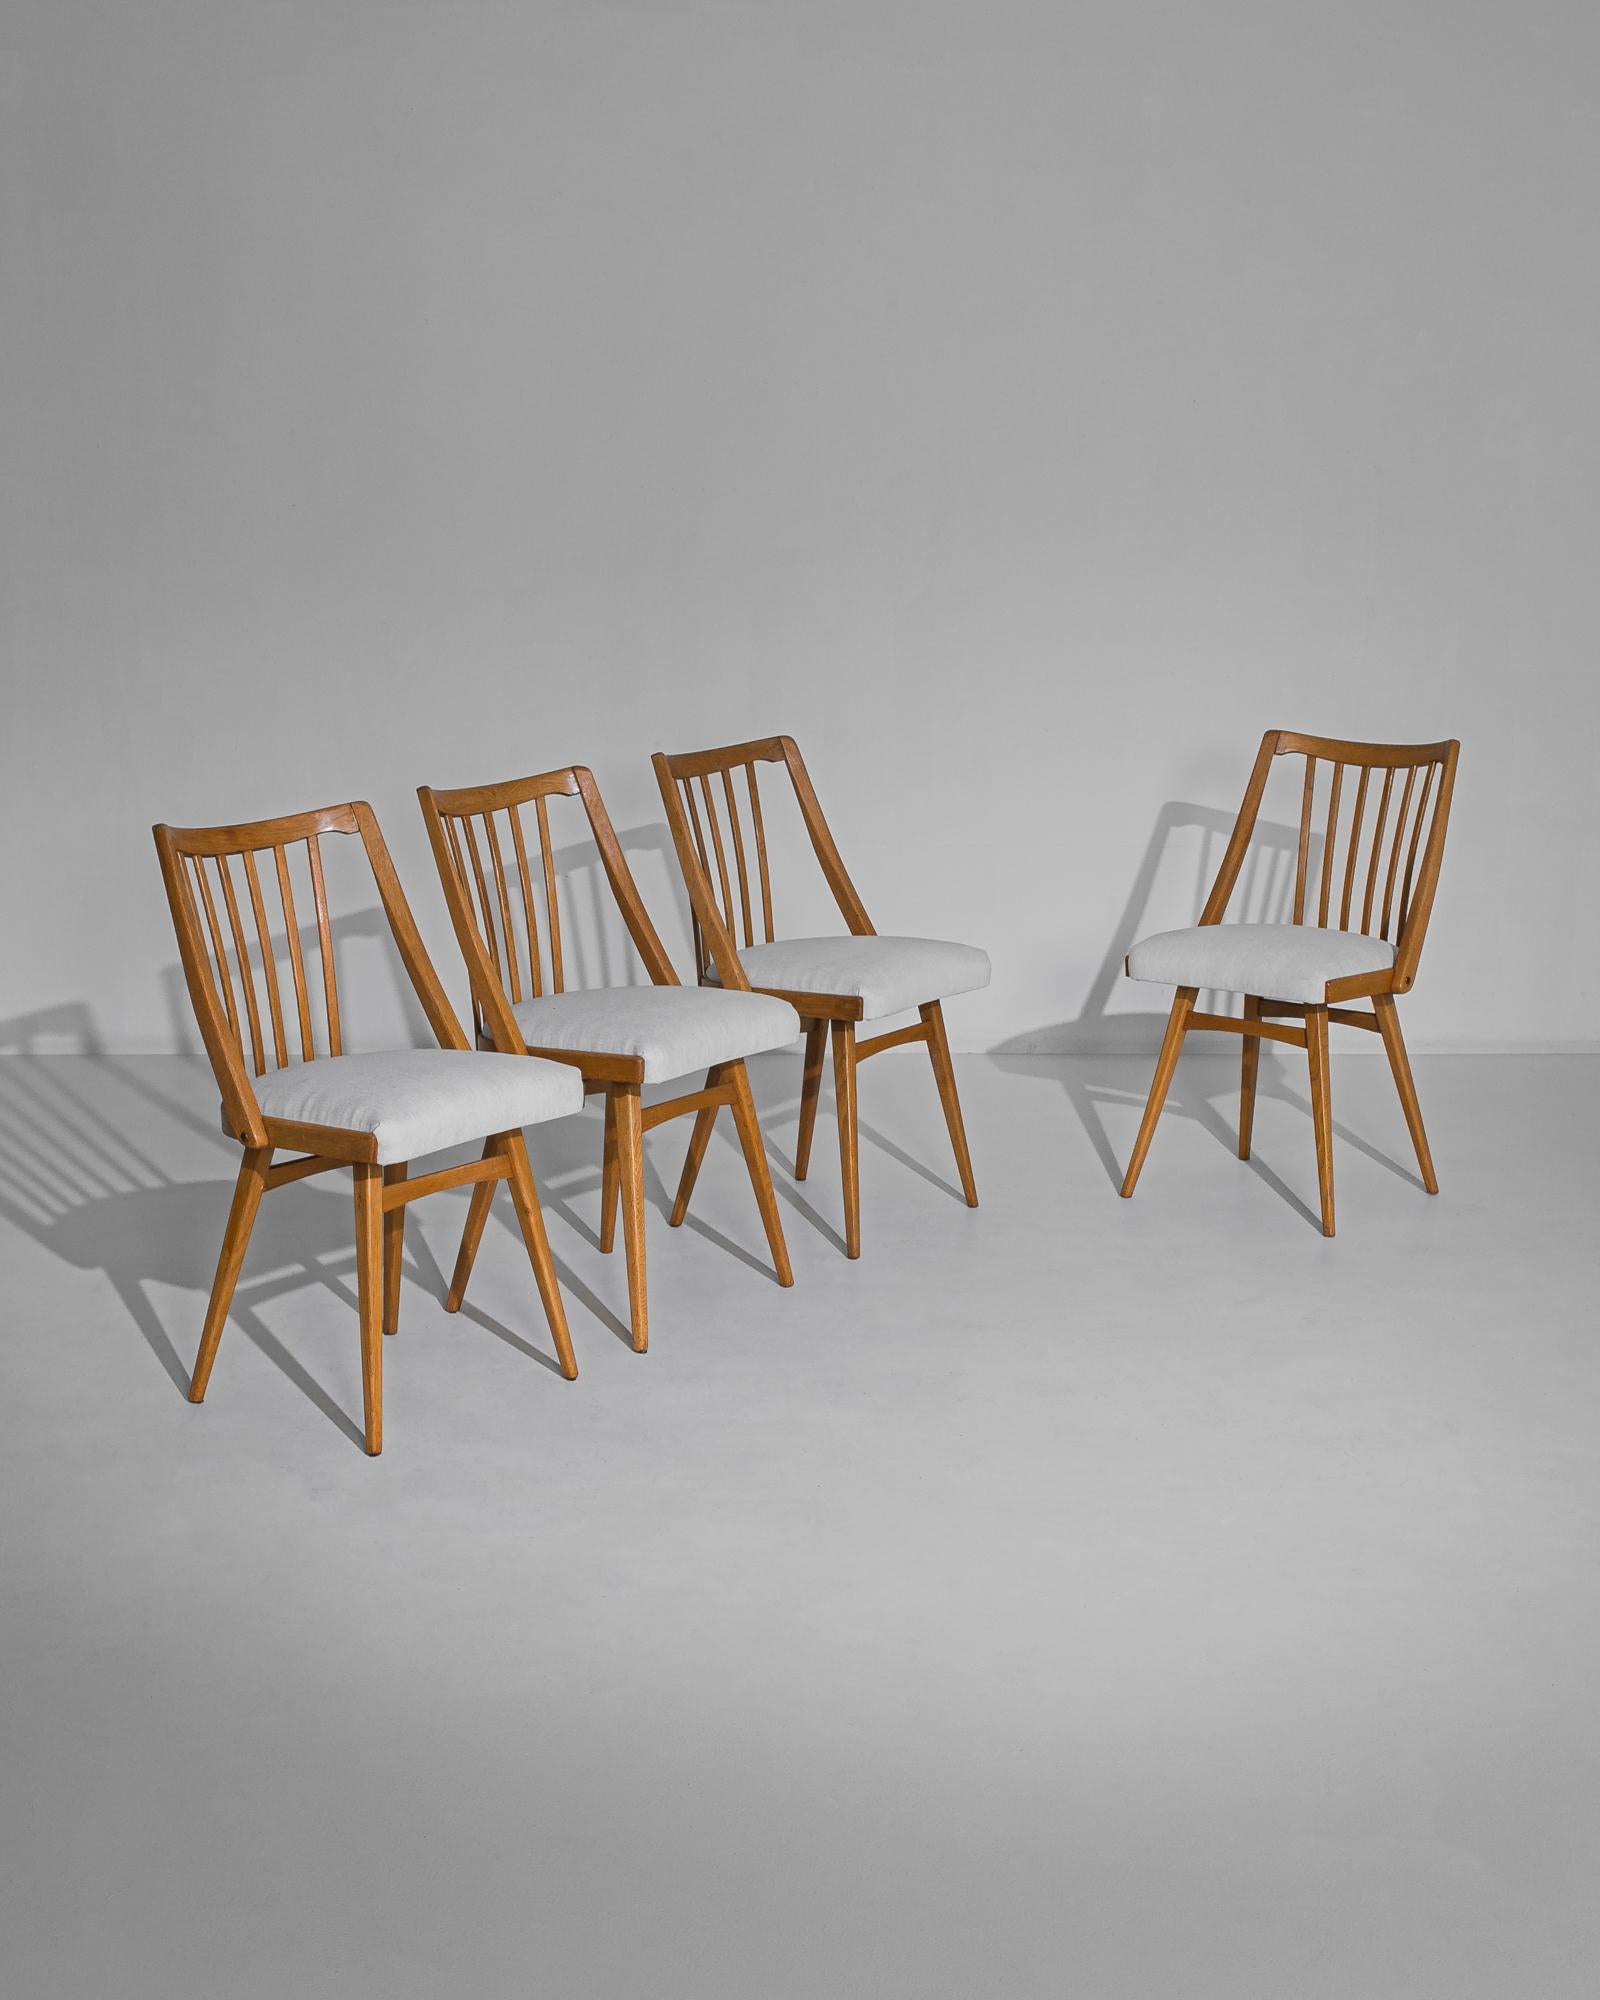 This set of four wooden dining chairs was made in the former Czechoslovakia, circa 1960. The splayed legs and subtle arcs of the top rails and stiles give the chairs an elegant silhouette. A slatted back enhances the streamlined design. Recently